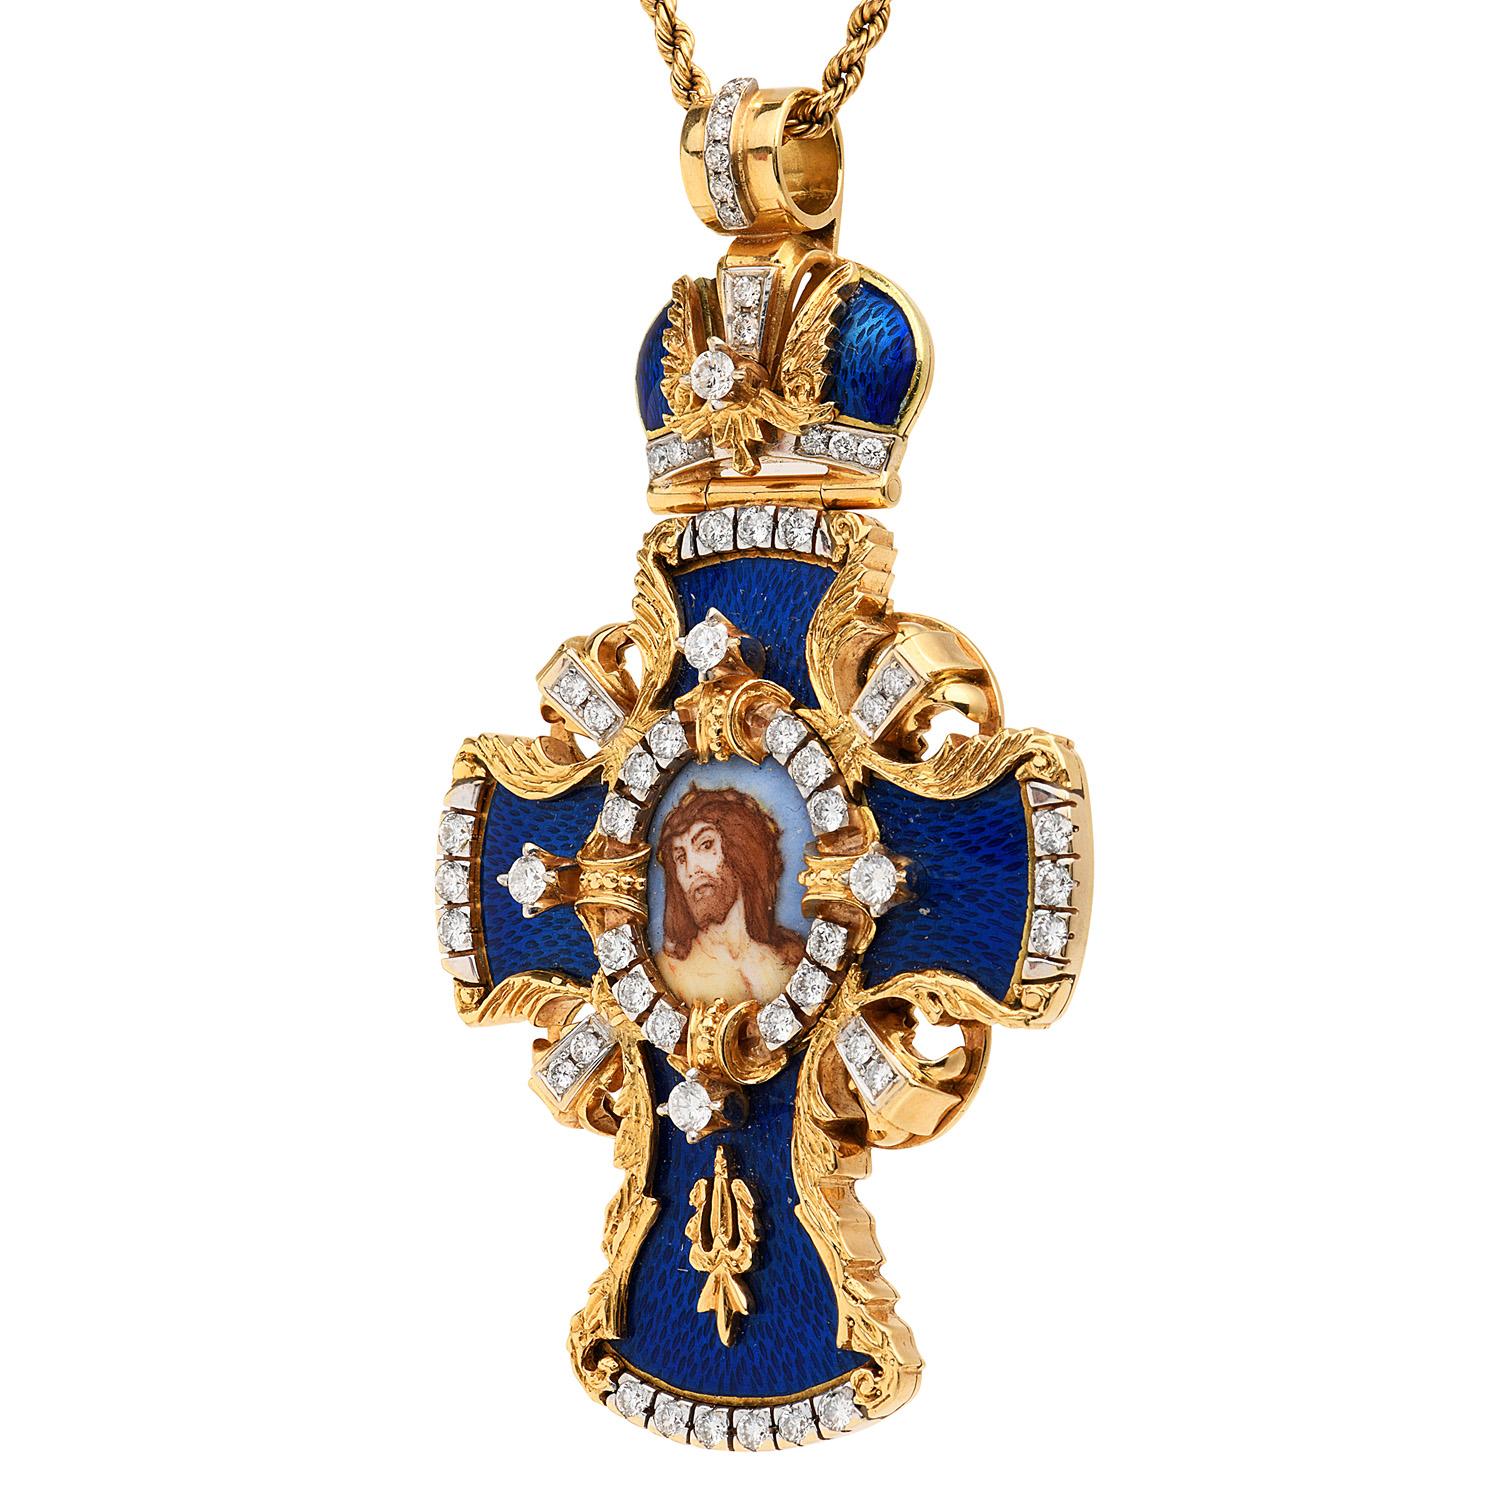 Large exquisite Italian European cross with blue enamel & Jesus Christ, face in the center, adorned by diamonds on a cross-shaped prominent pendant, 

Crafted in solid 18K yellow gold, hand-made, 

Enhanced by (52) round-cut, prong-set, Diamonds